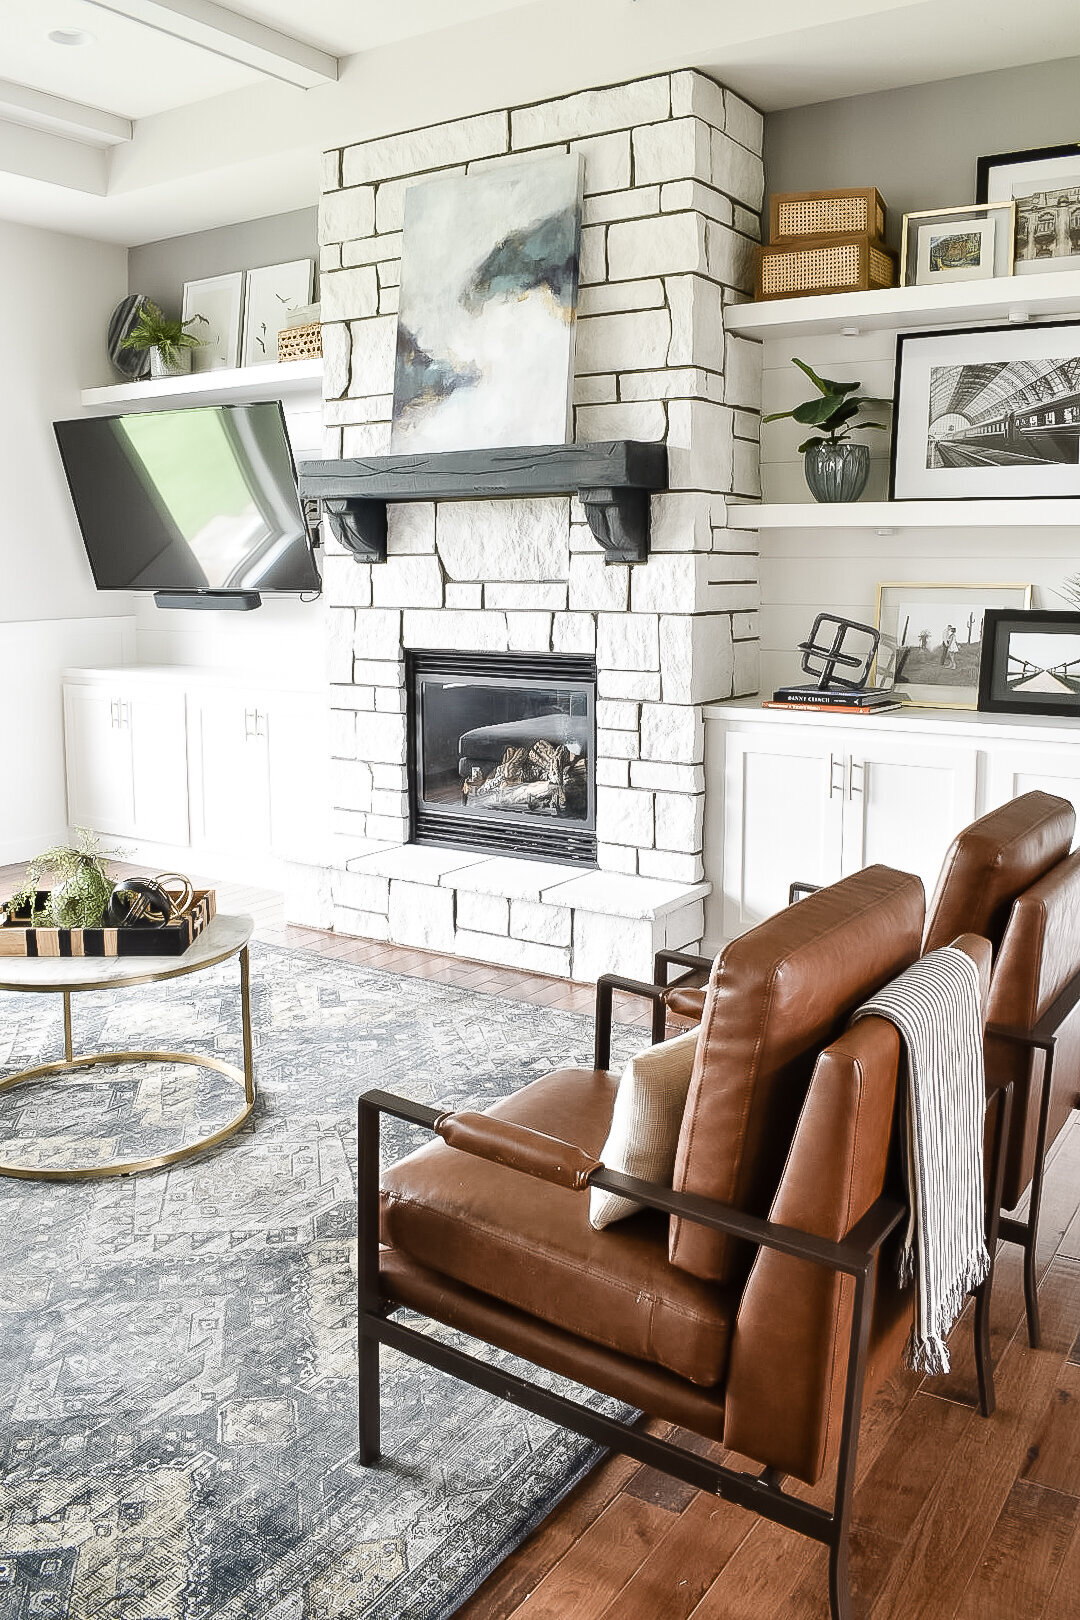 Two modern industrial leather chairs sit side by side in a living room with large open shelves